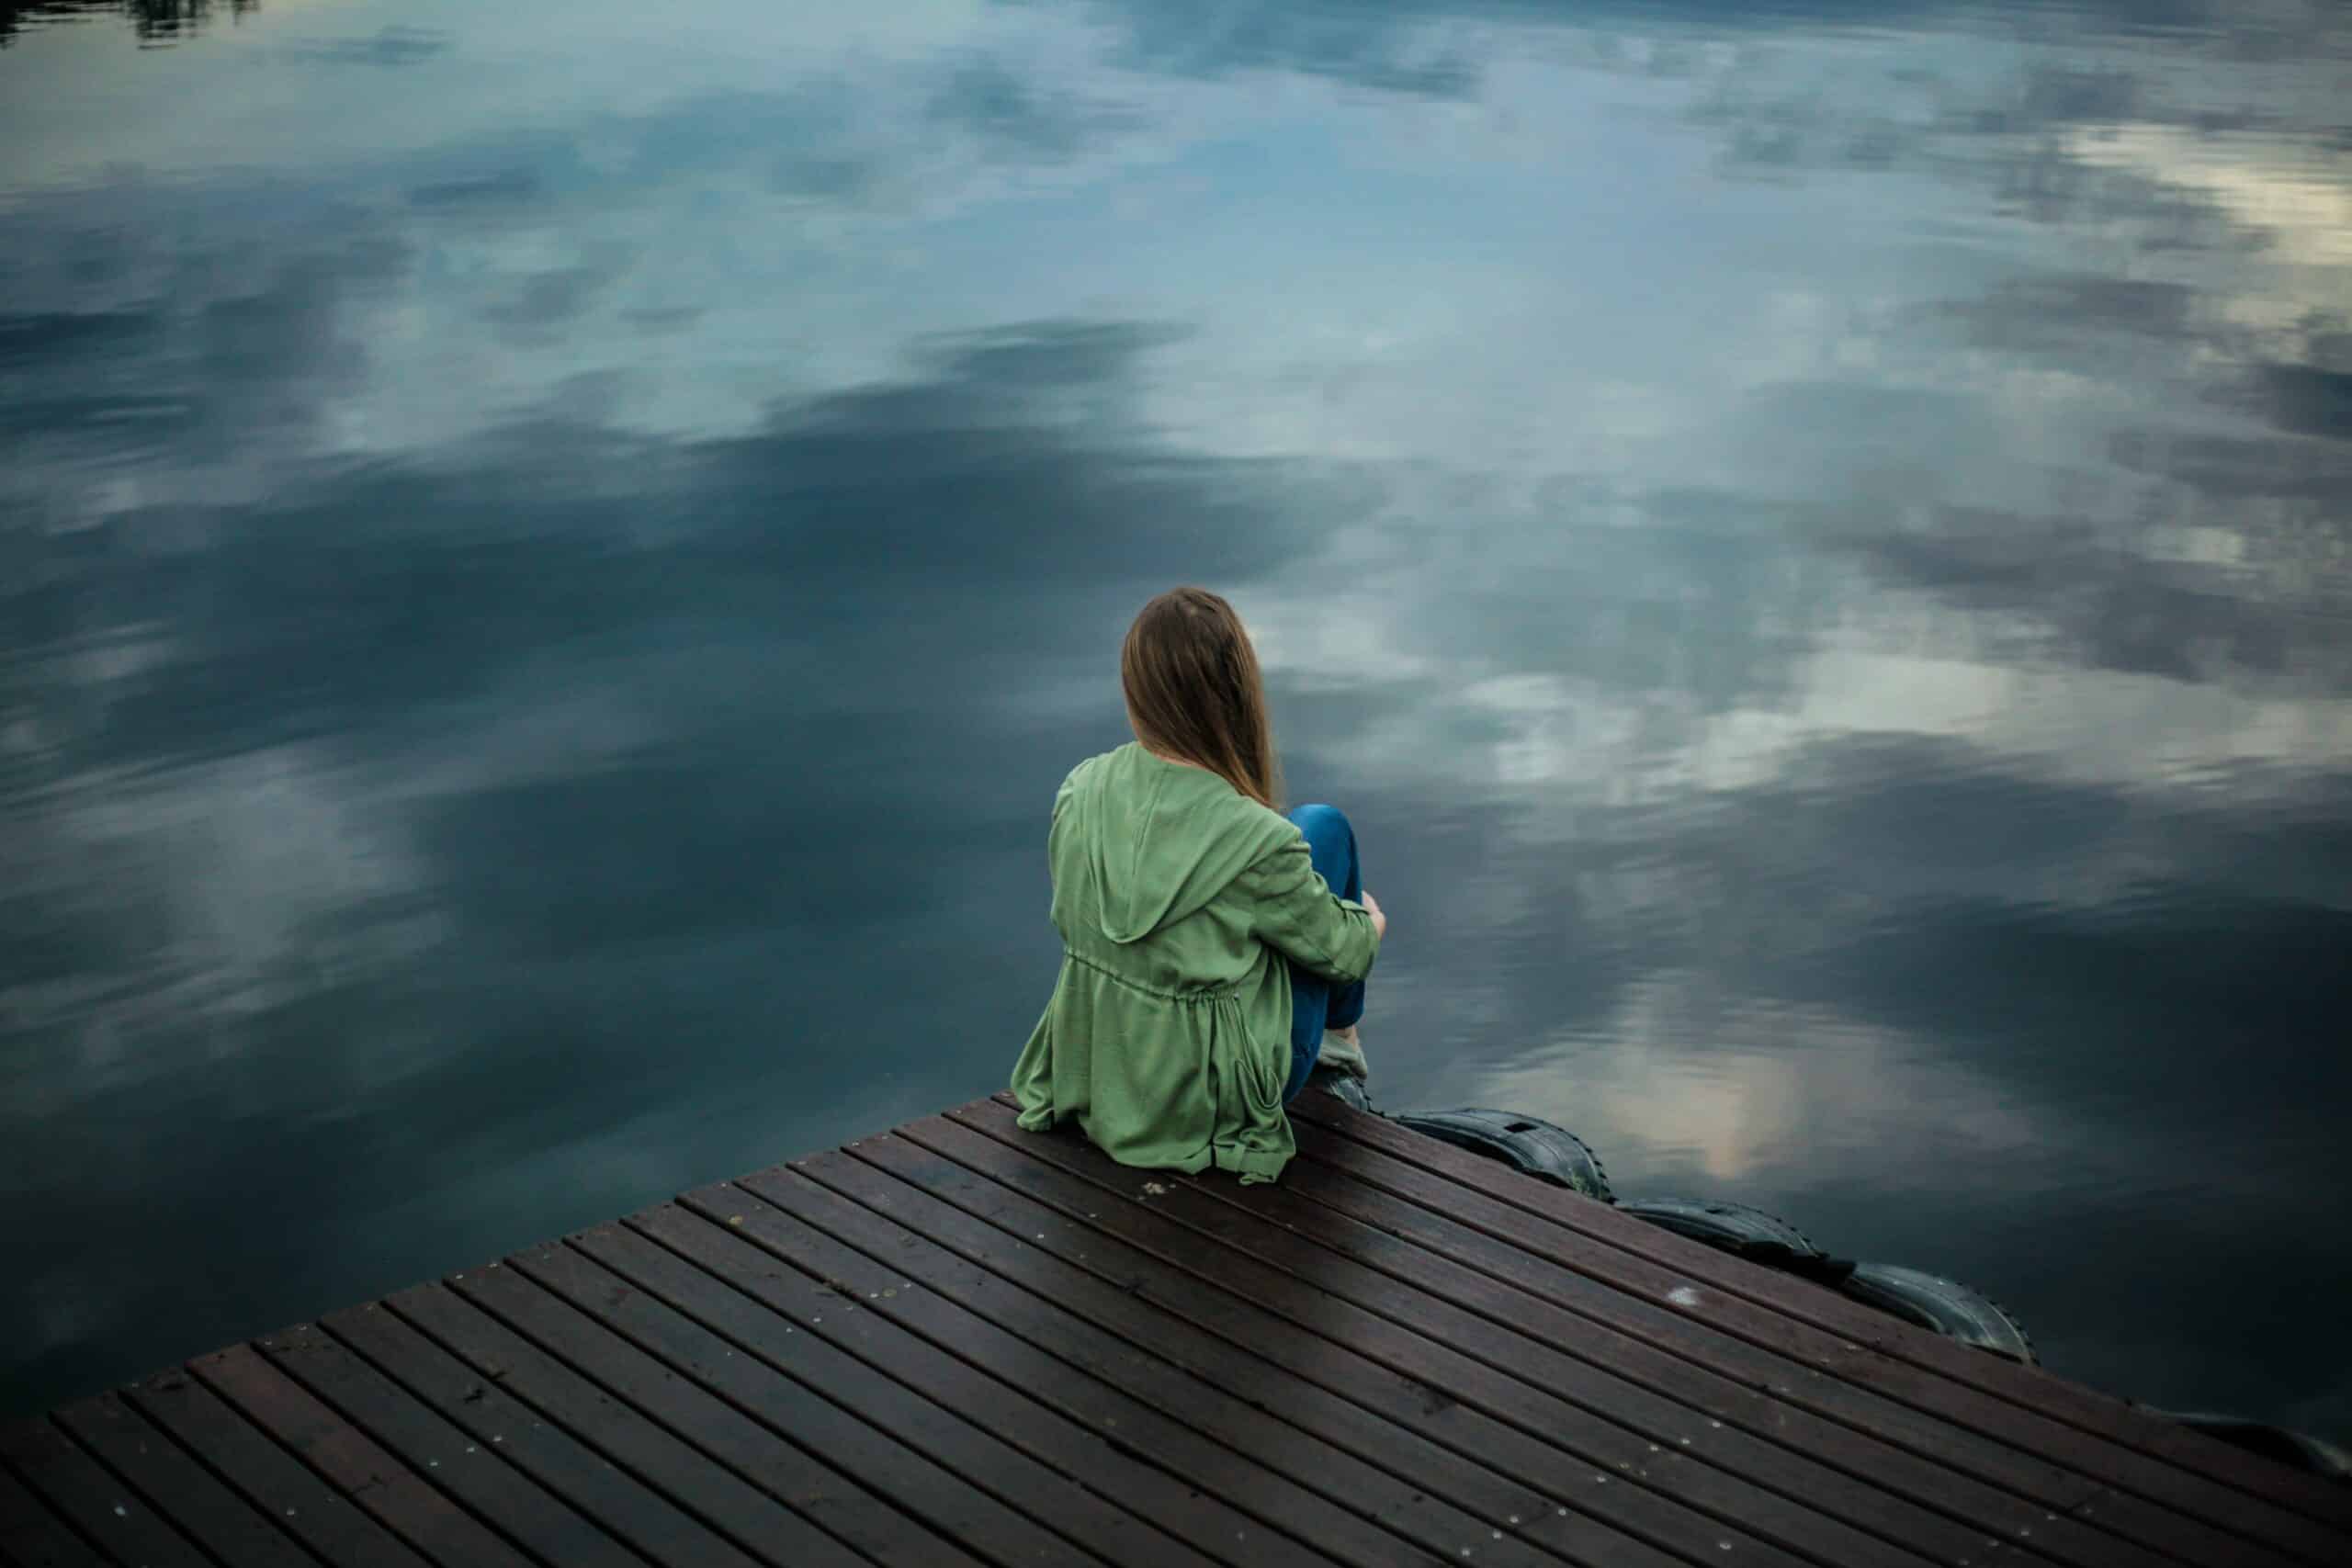 A girl looking at the body of water with a blurred effect.